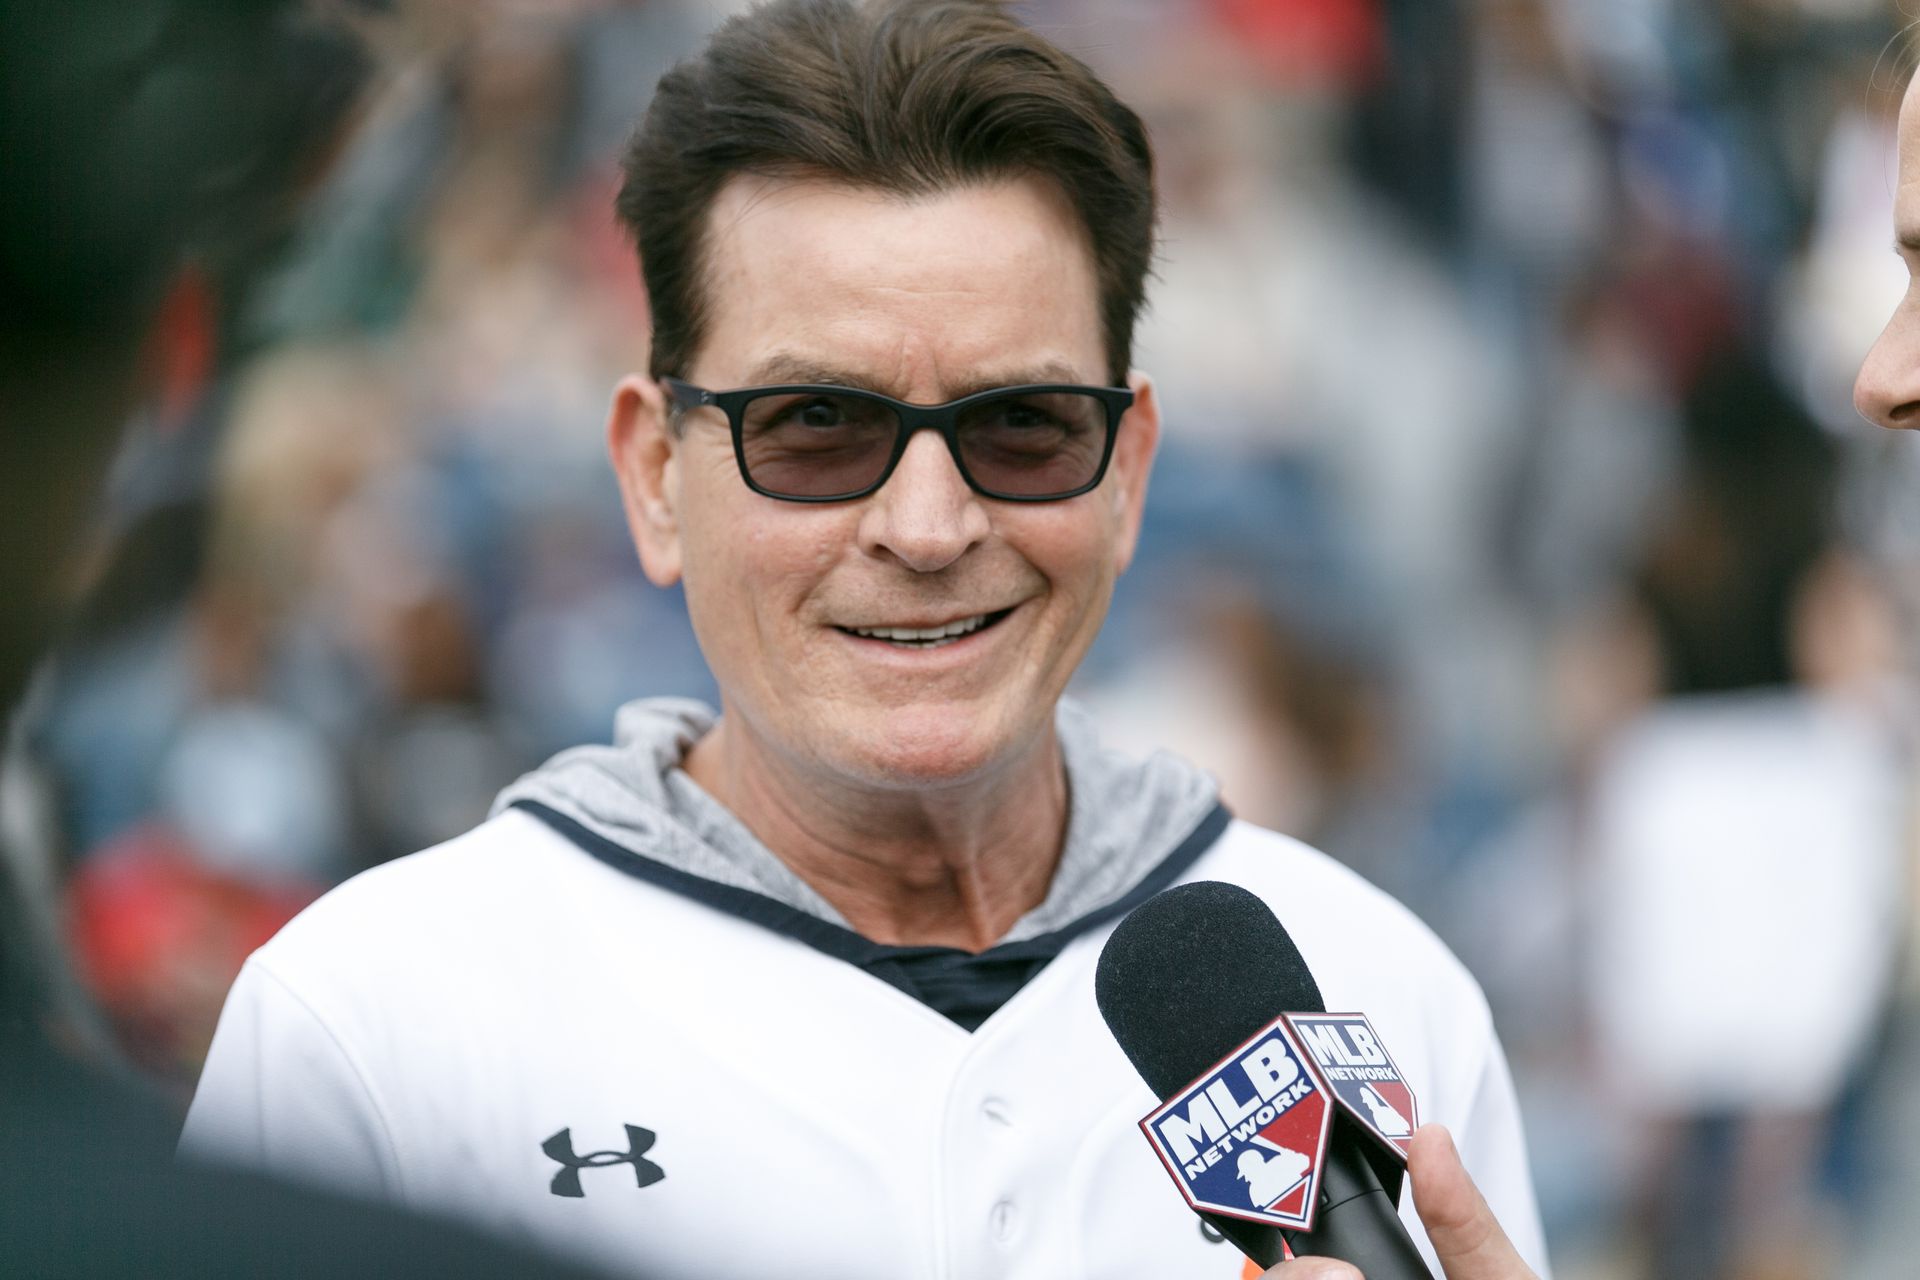 Charlie Sheen changed his mind